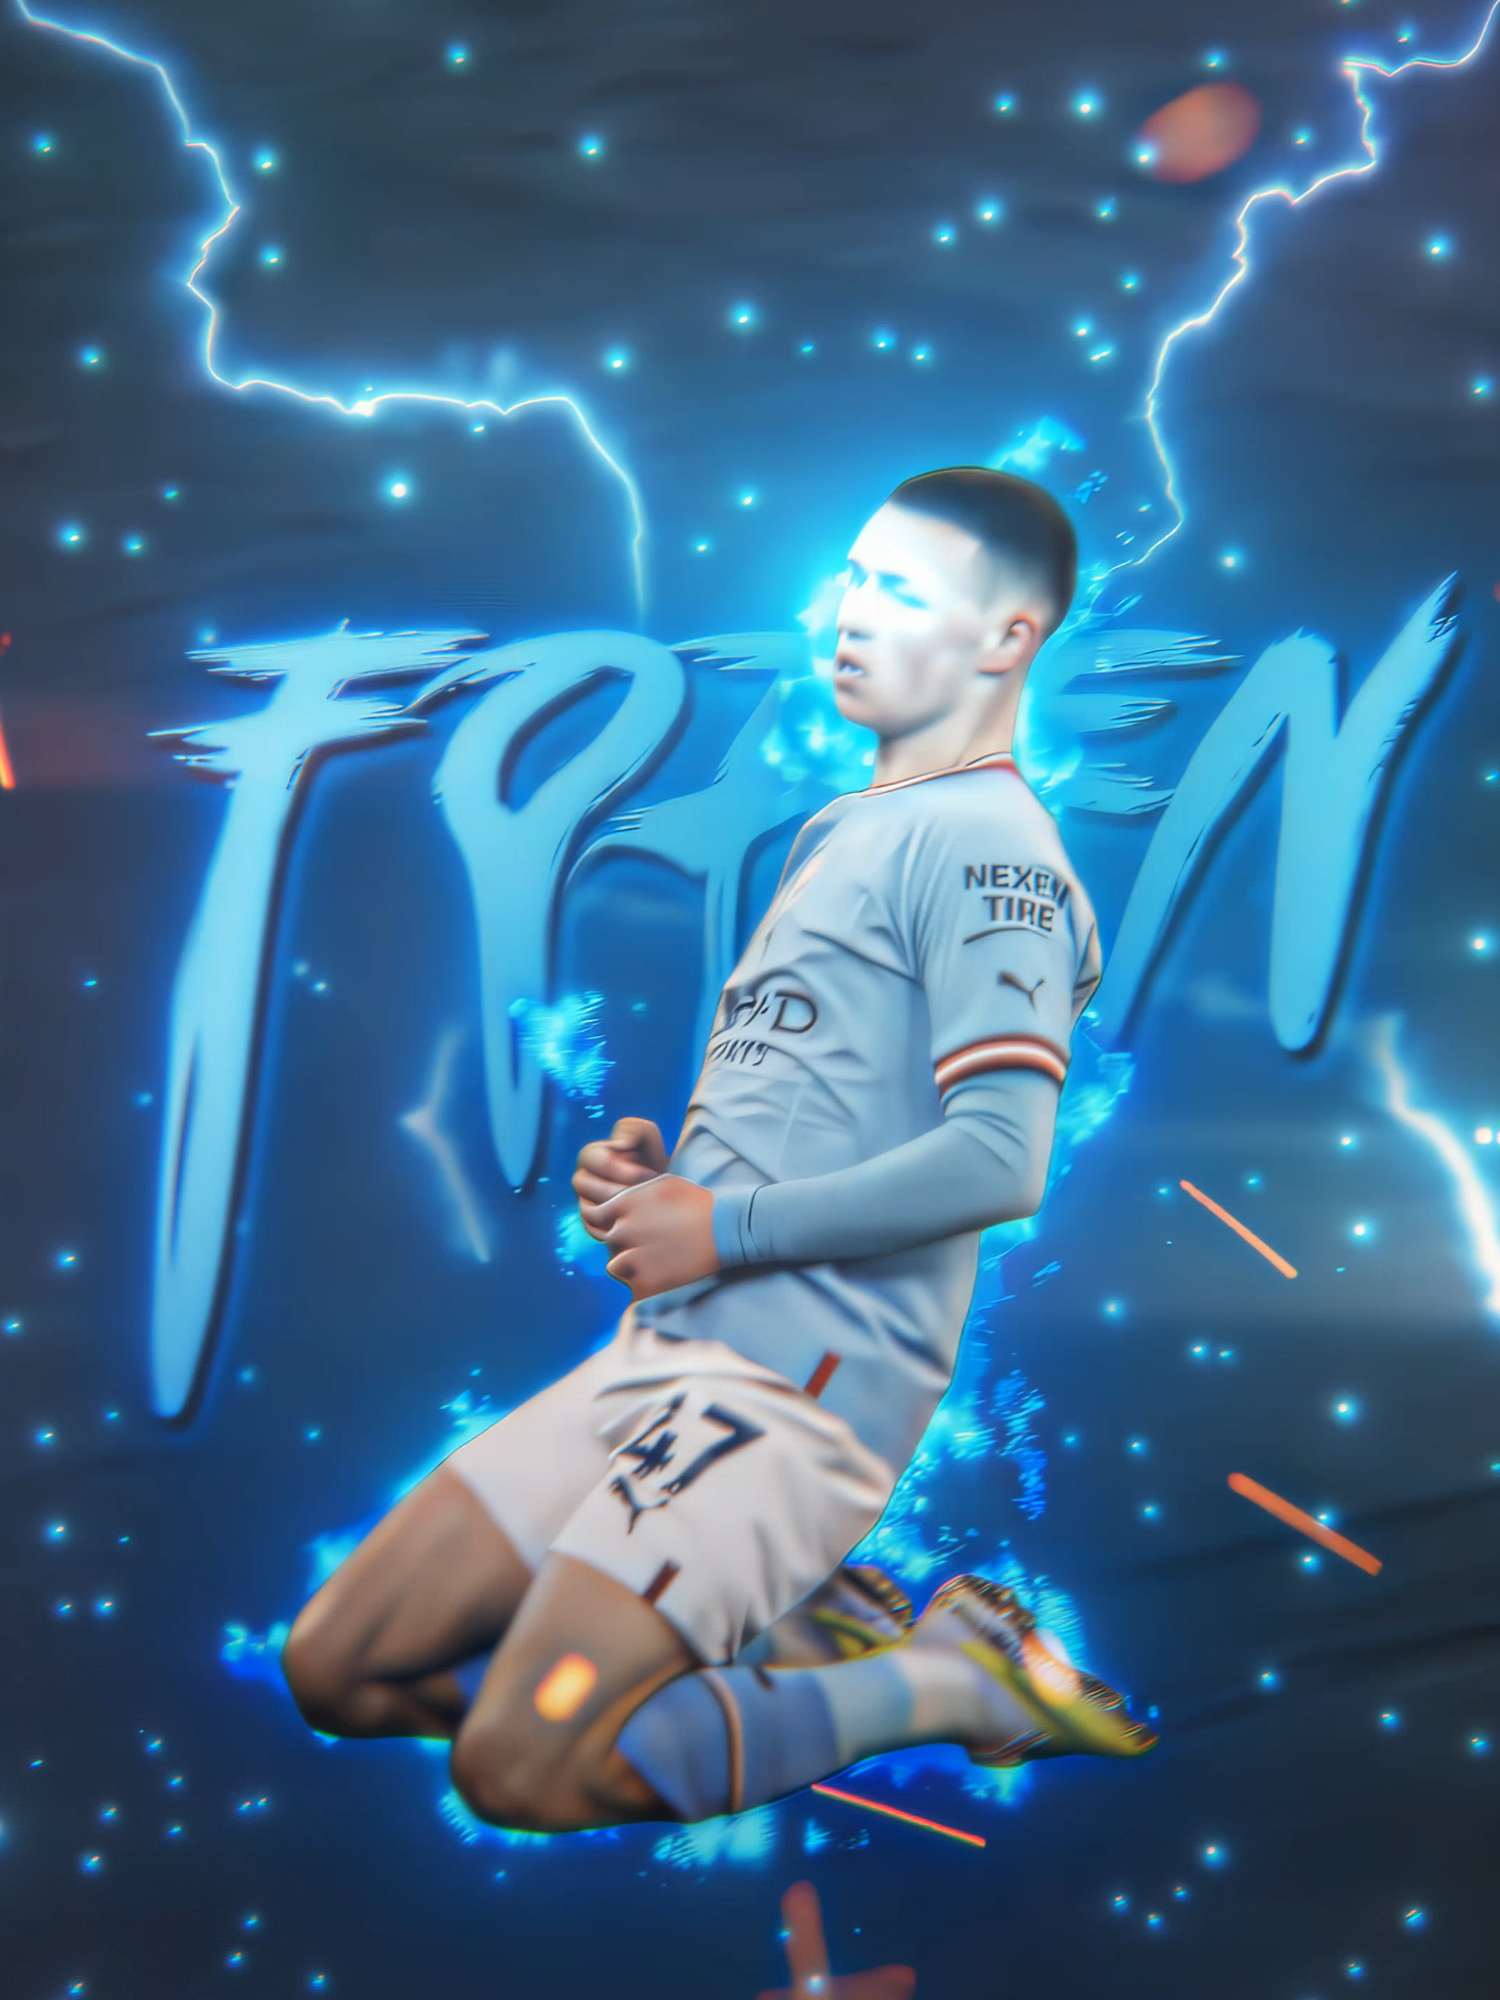 Guess Whos Backkkkk 🐐🔥 || Everyone Tag @philfoden plz || Edit Like This In BIO! || #foden #philfoden #edit #goat #footballedit #ae #aftereffects #Soccer #euros #fy #viral #audz #fyp